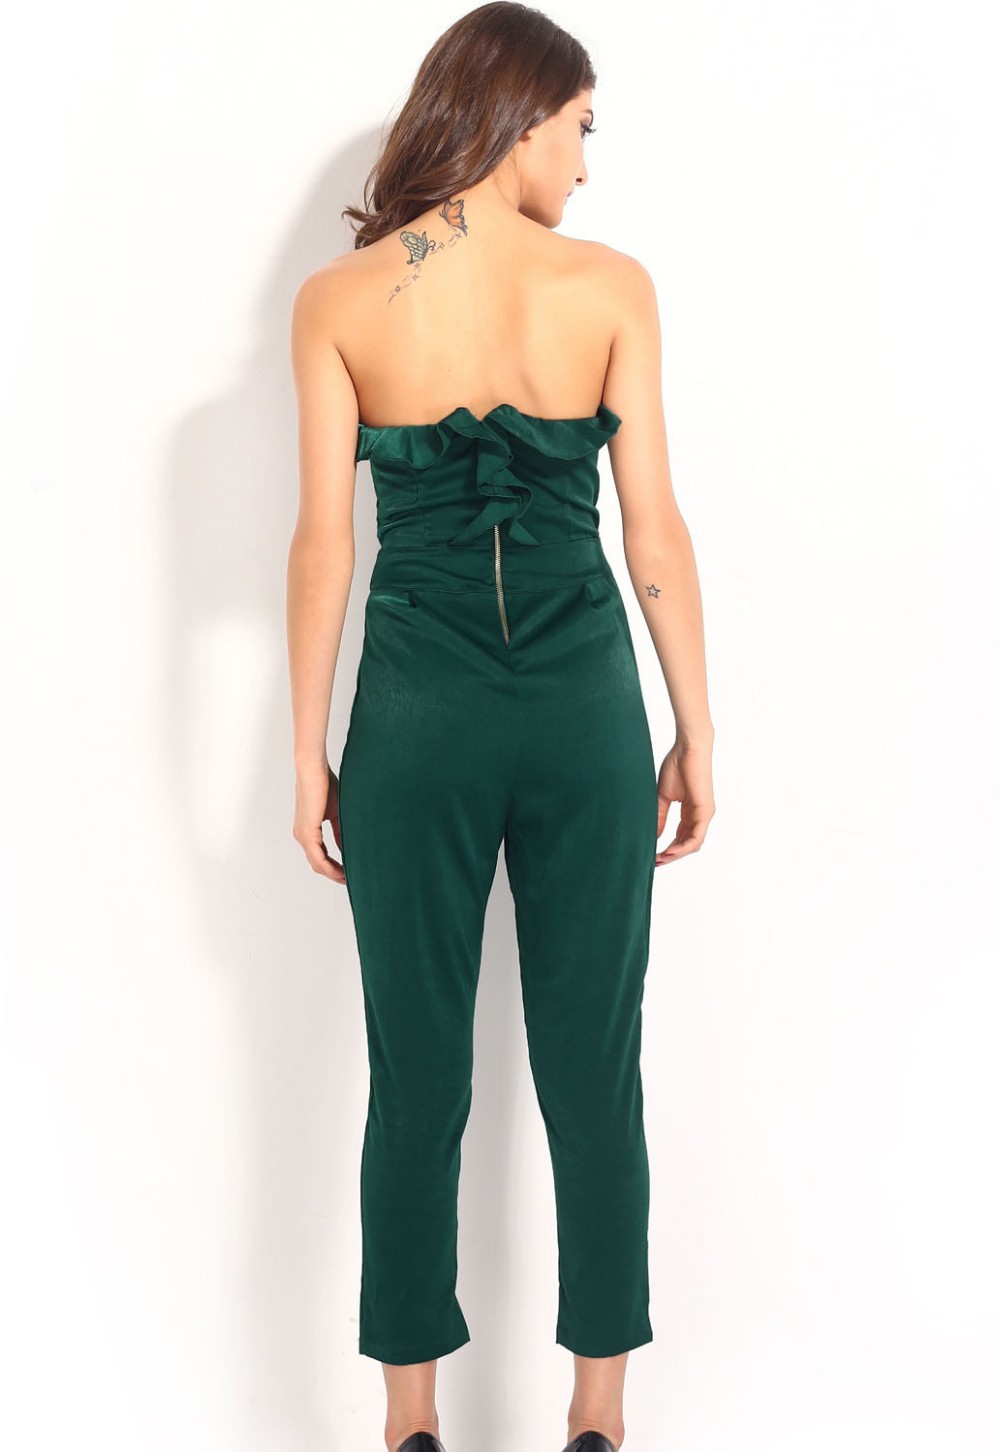 Green-Bandeau-Jumpsuit-with-Frill-Front-LC6225-3-6